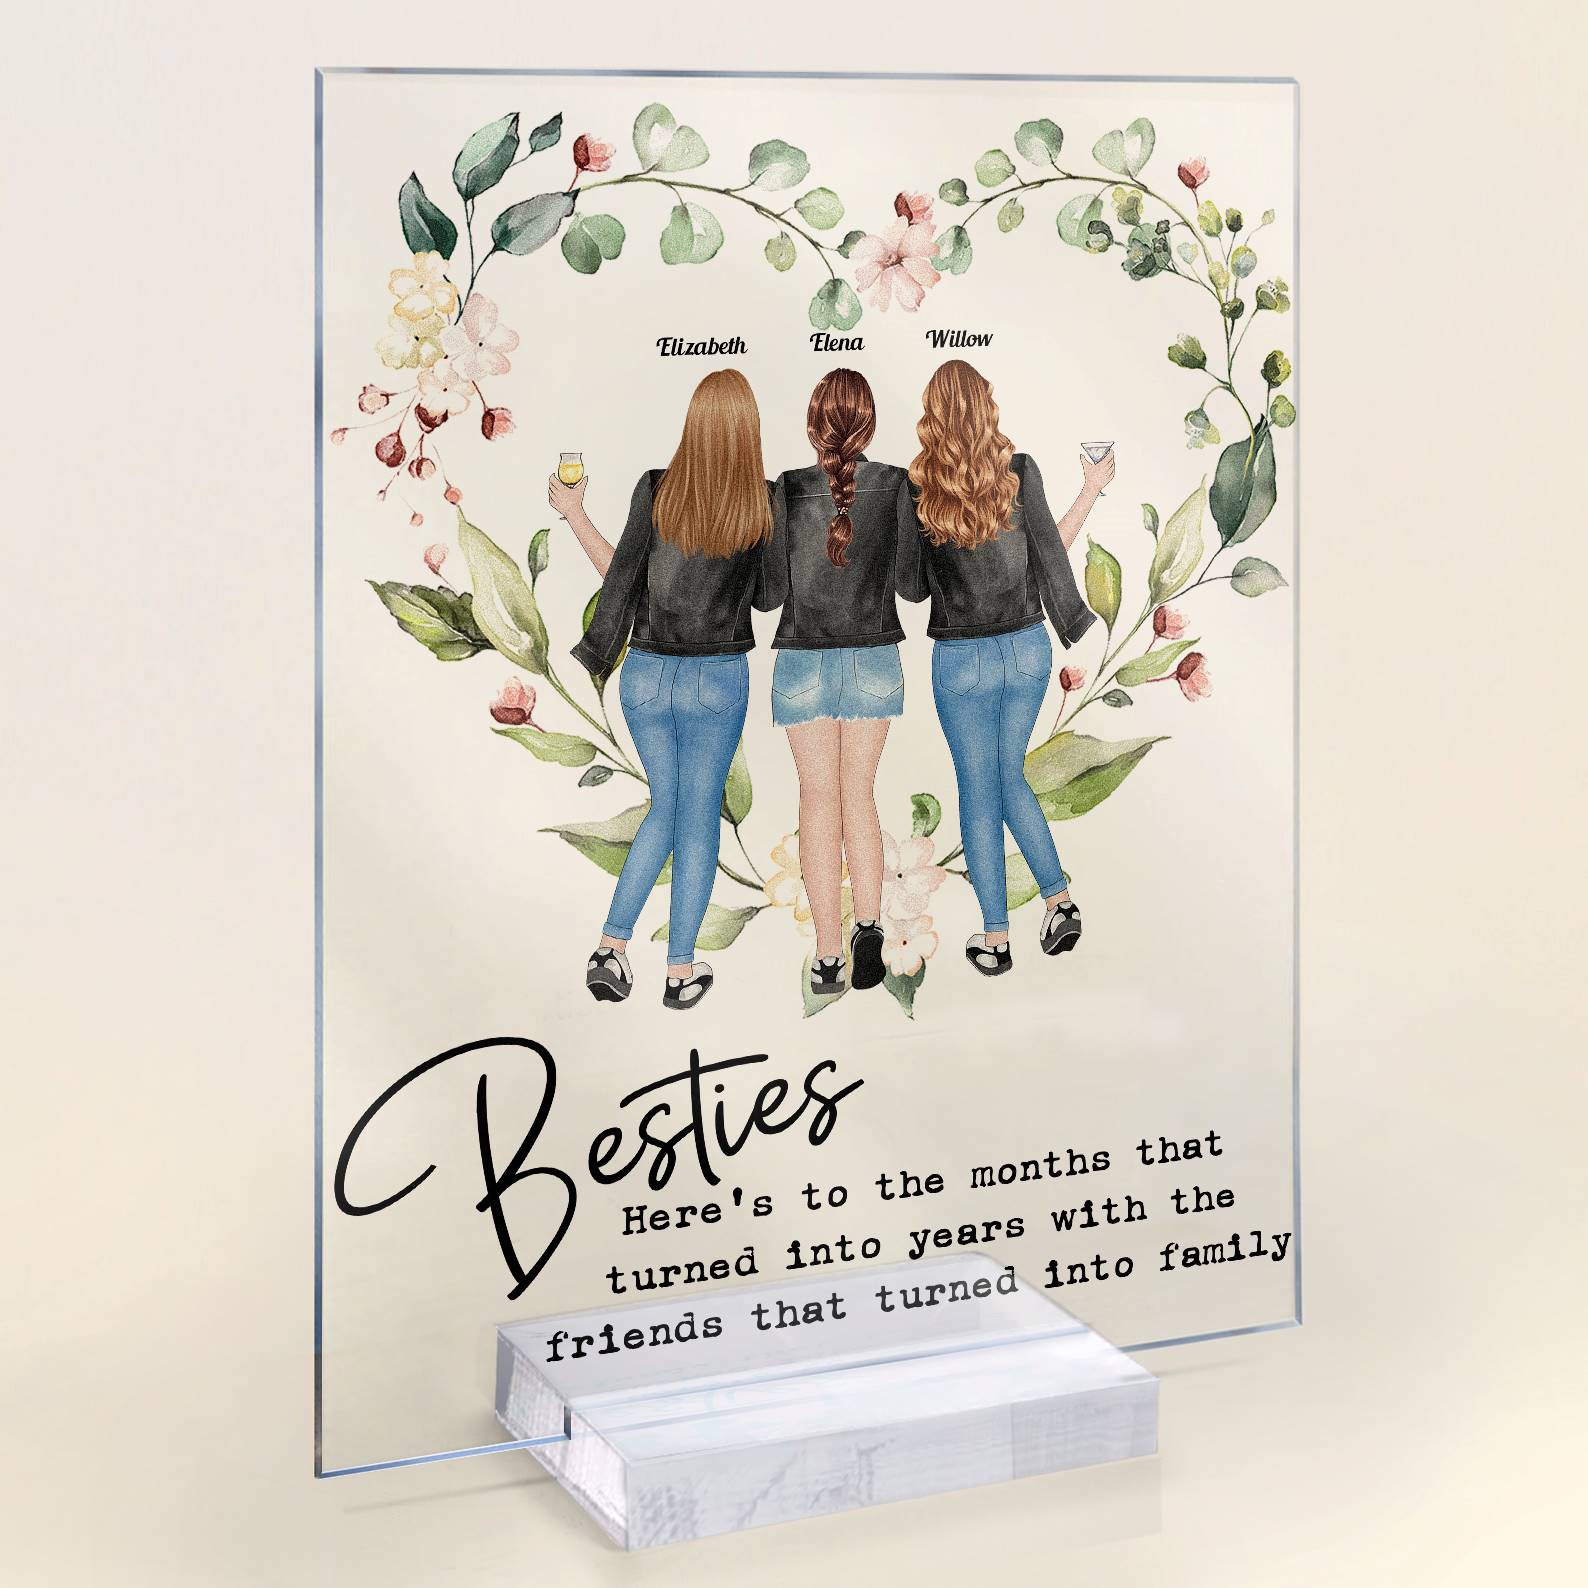 With The Friends That Turned Into Family - Personalized Acrylic Plaque - Birthday Gift New Year Gift For Besties, BFF, Soul Sisters